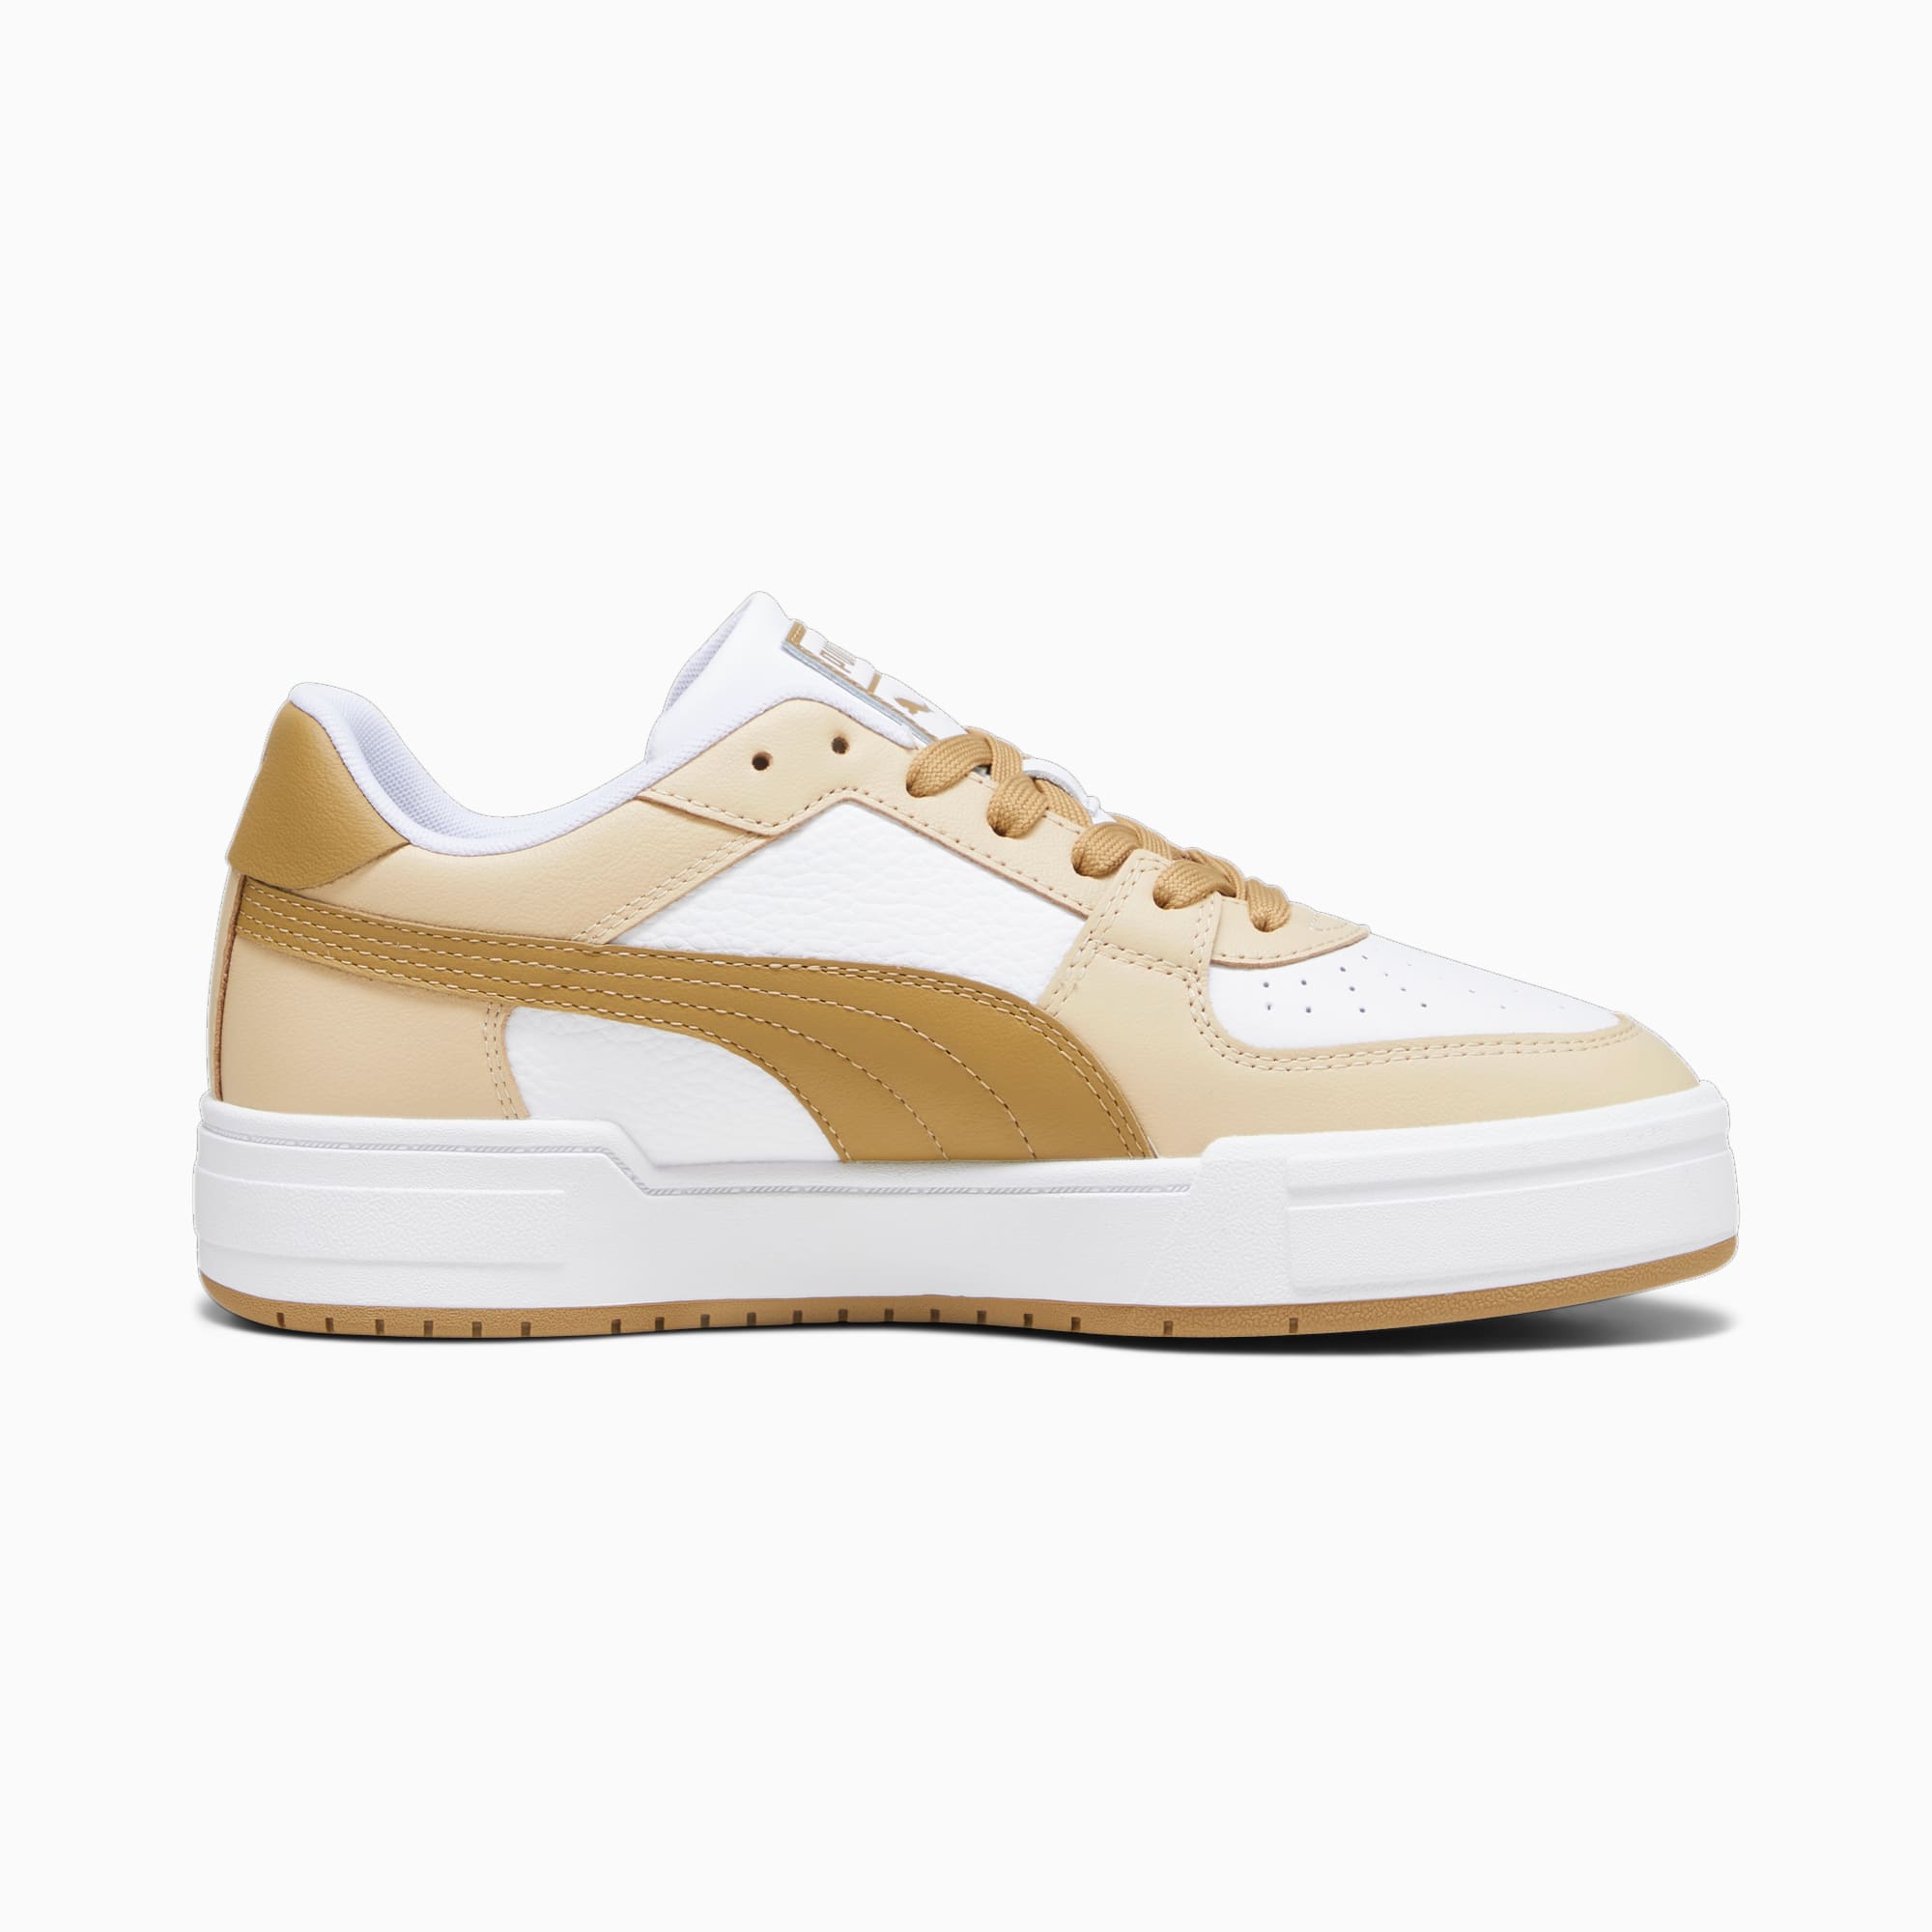 Women's PUMA Ca Pro Classic Trainers, White/Granola/Toasted, Size 38,5, Shoes